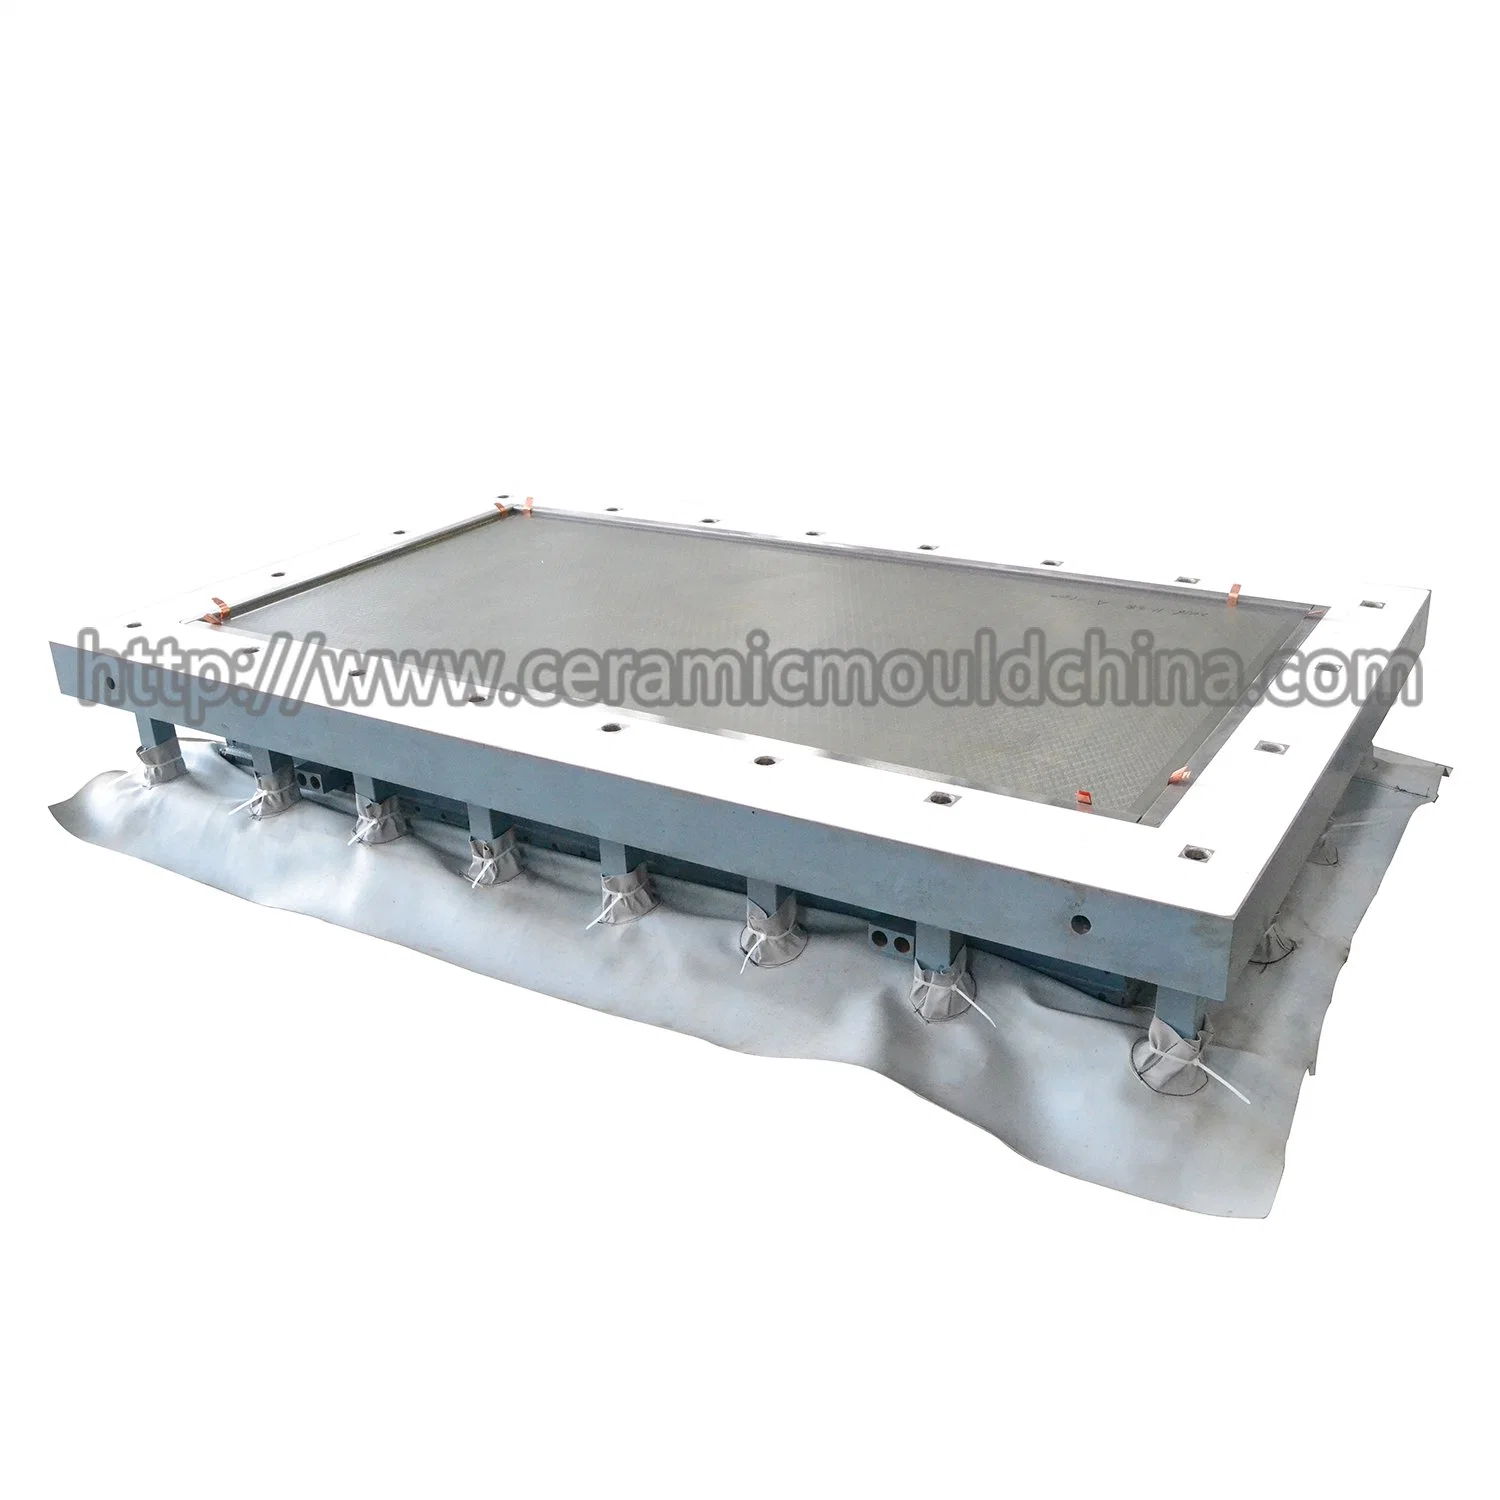 China Ceramic Tile Mold and Die for Sacmi Press